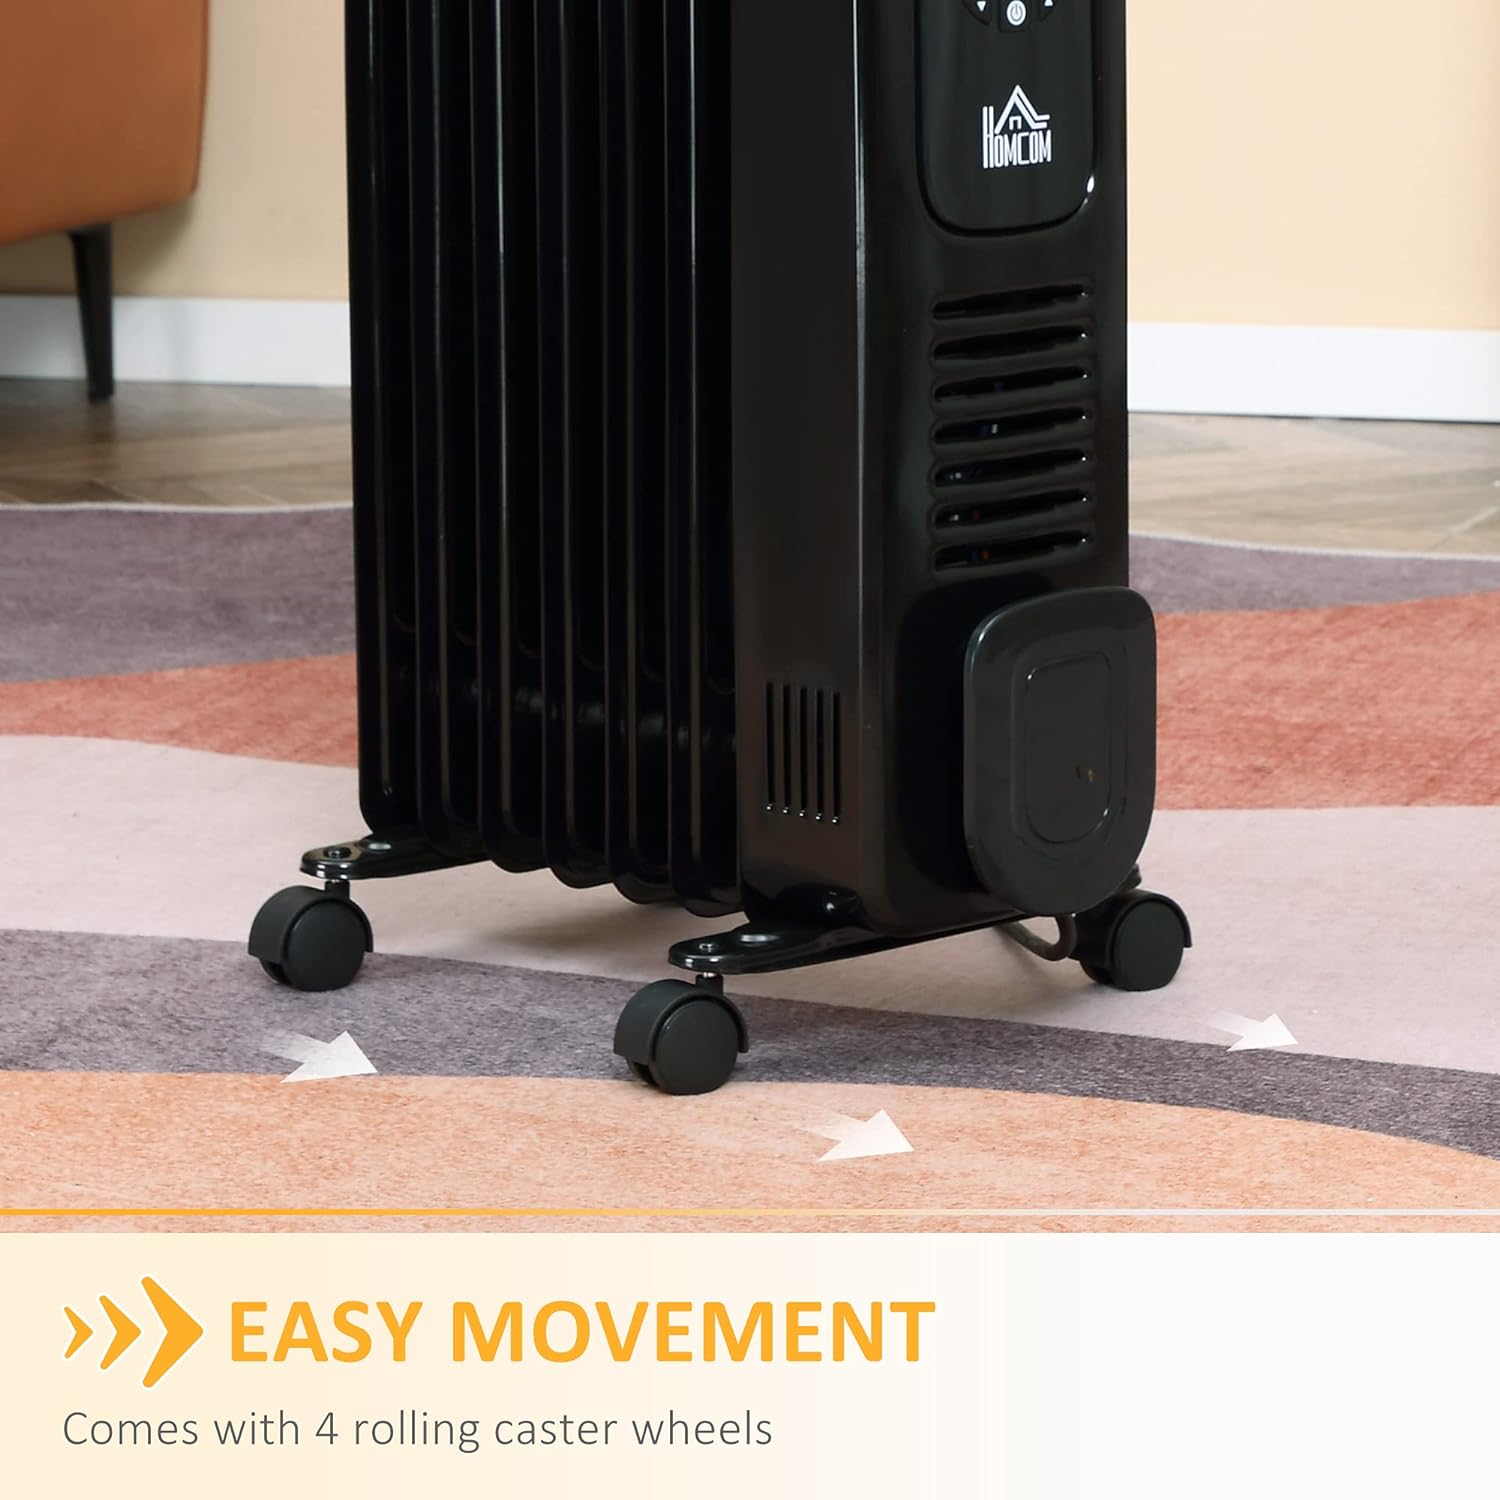 Maplin 1630W 7 Fin Portable Oil Filled Radiator with Timer & Remote Control - maplin.co.uk